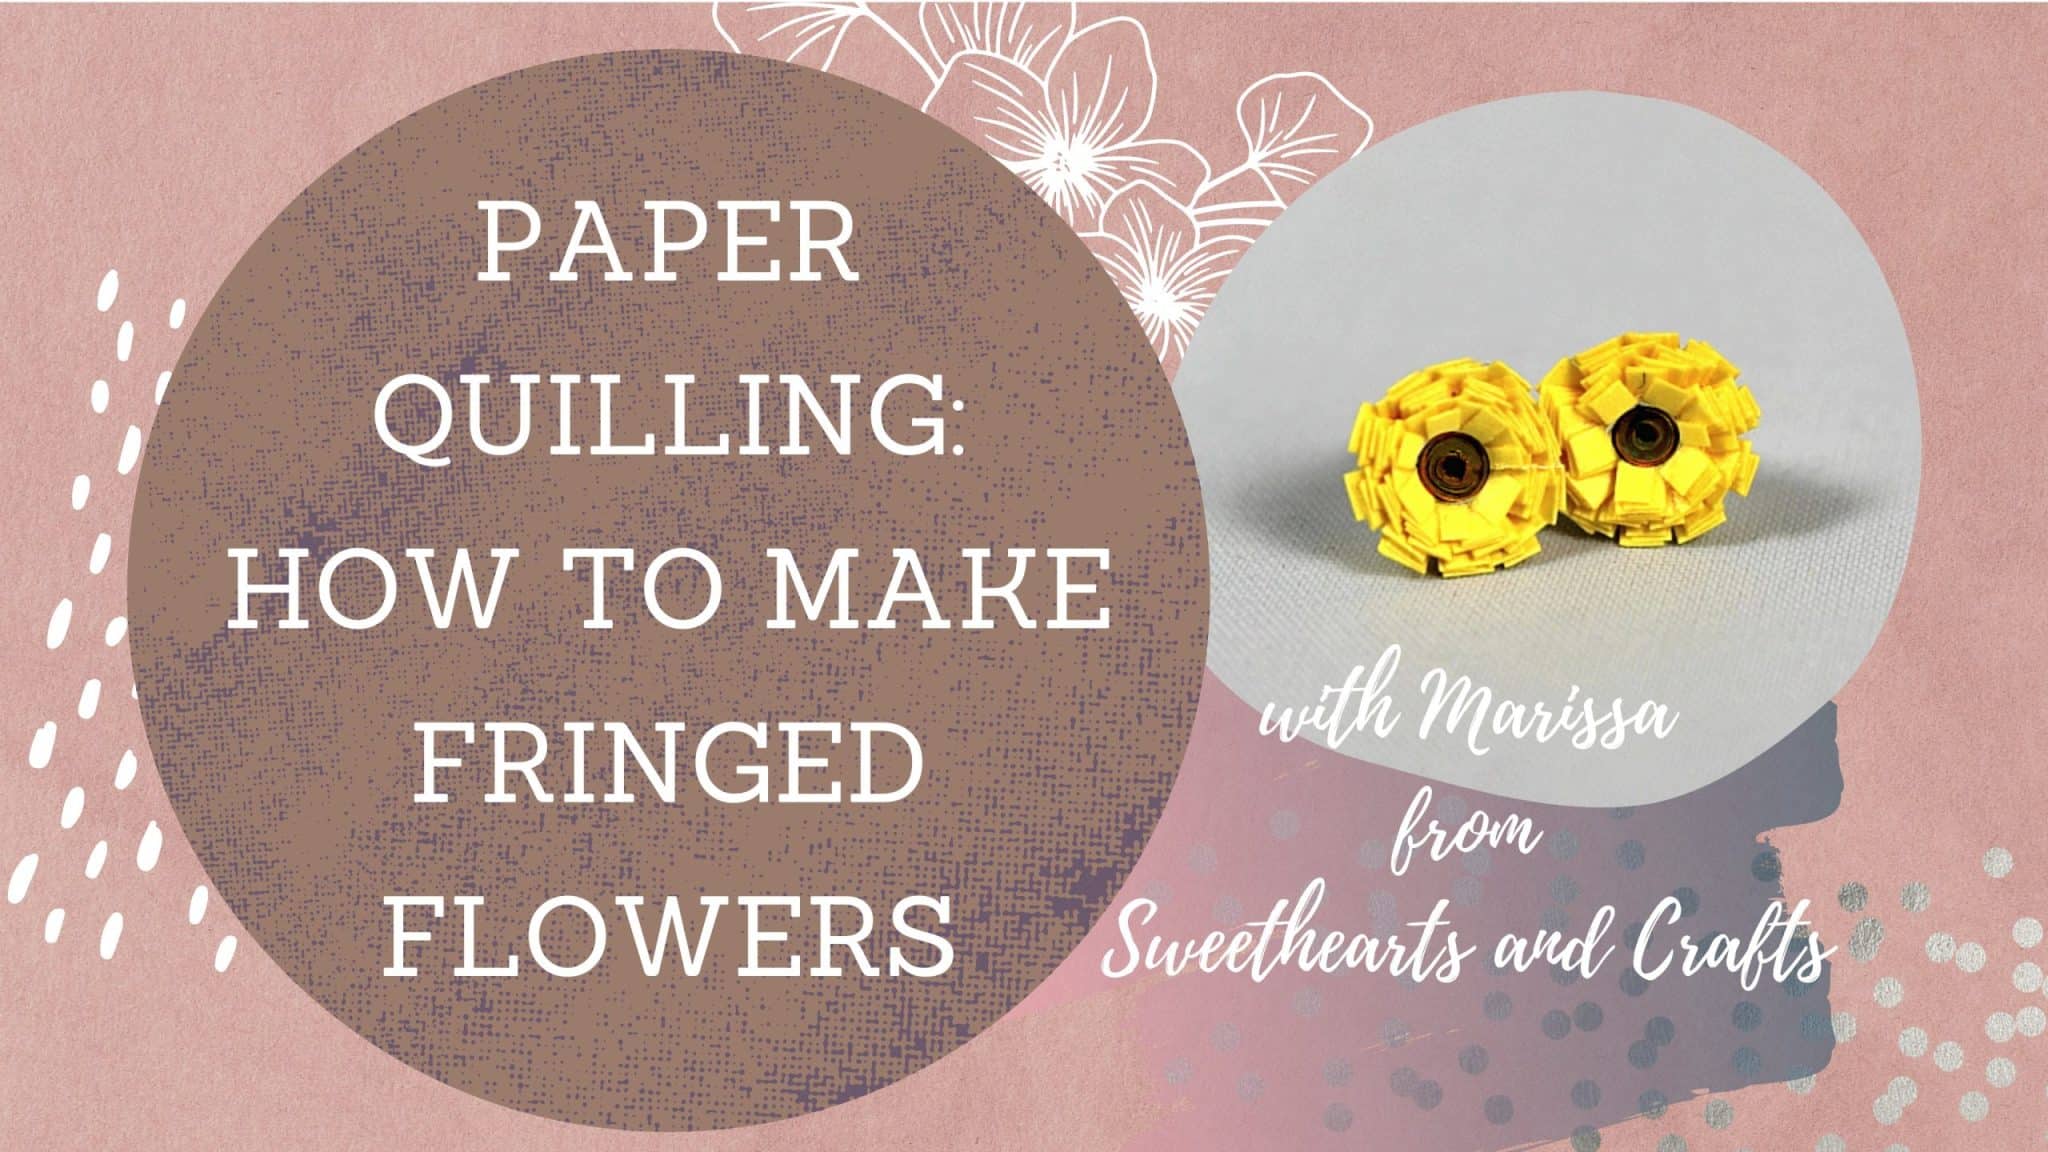 How to make fringed flowers